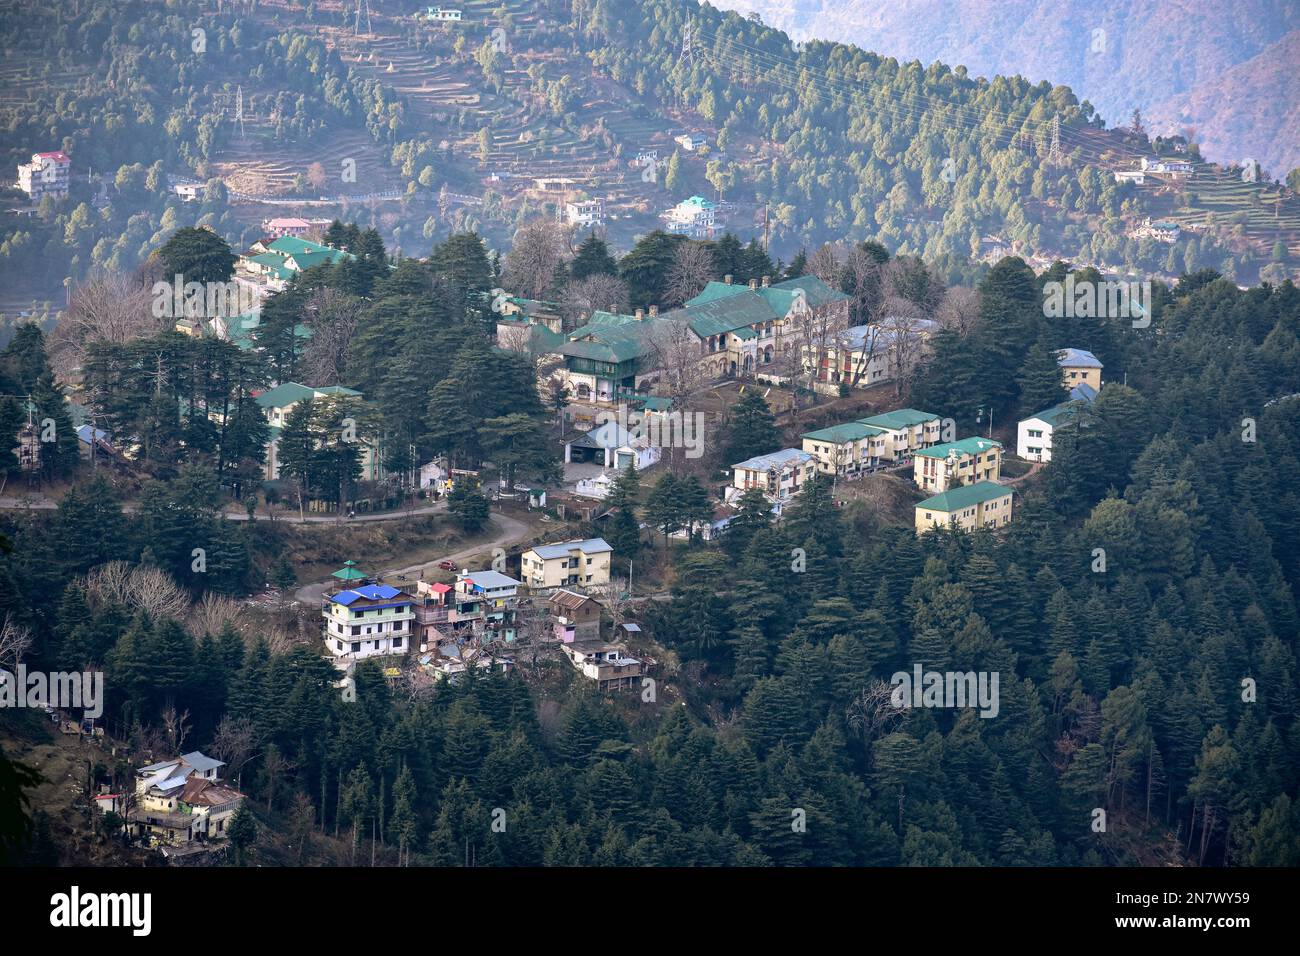 View of Houses and Hotels in Dalhousie, Himachal Pradesh, India Stock Photo